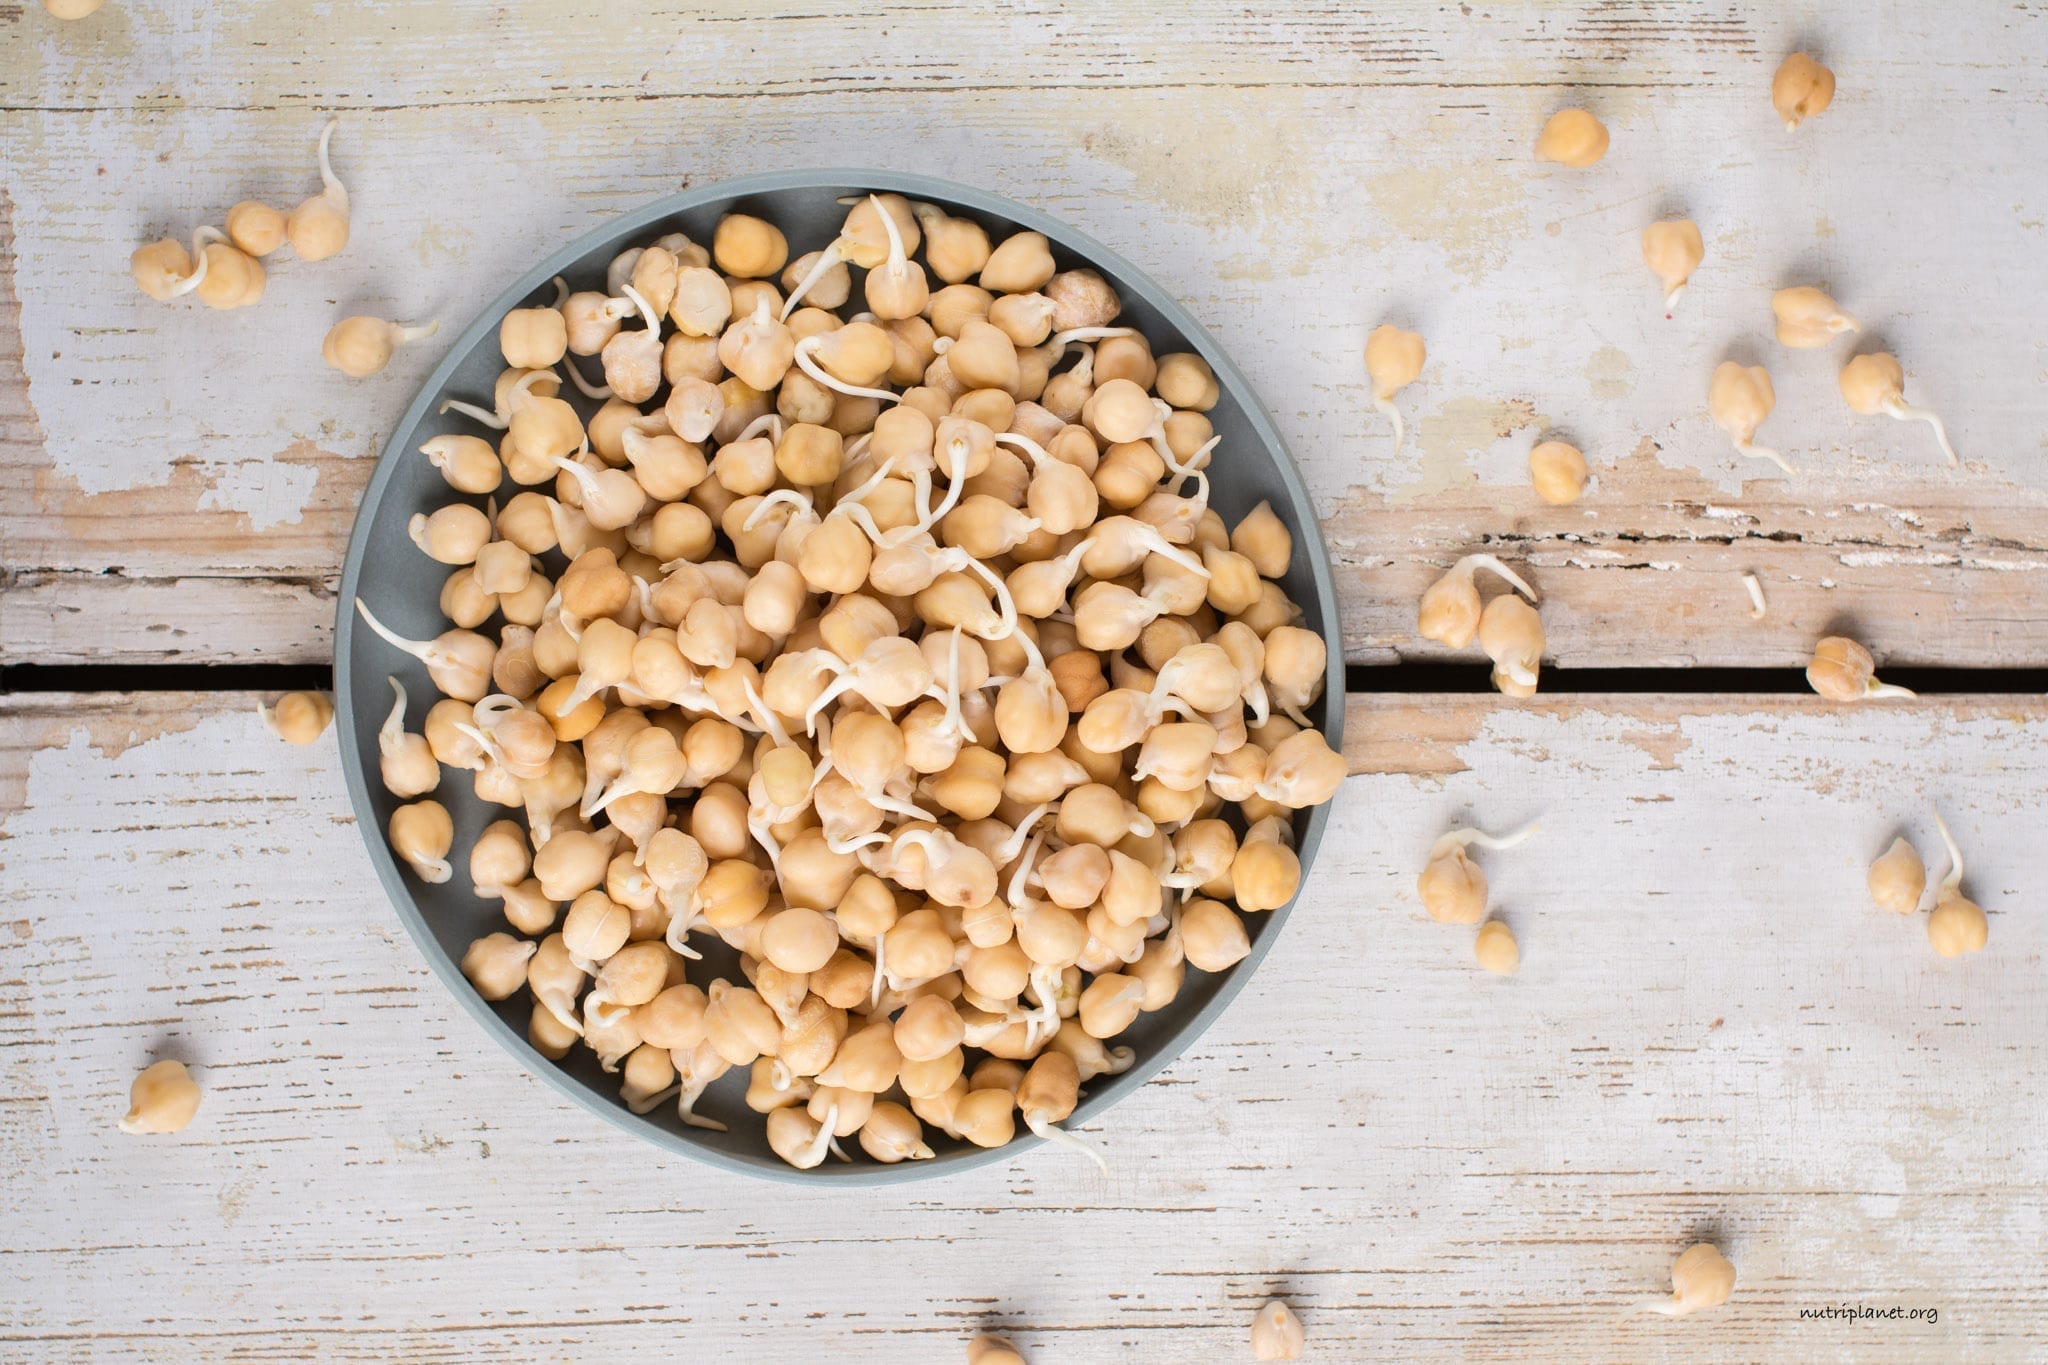 Beyond Hummus: Why the Chickpea Could Be the Most Sought-After